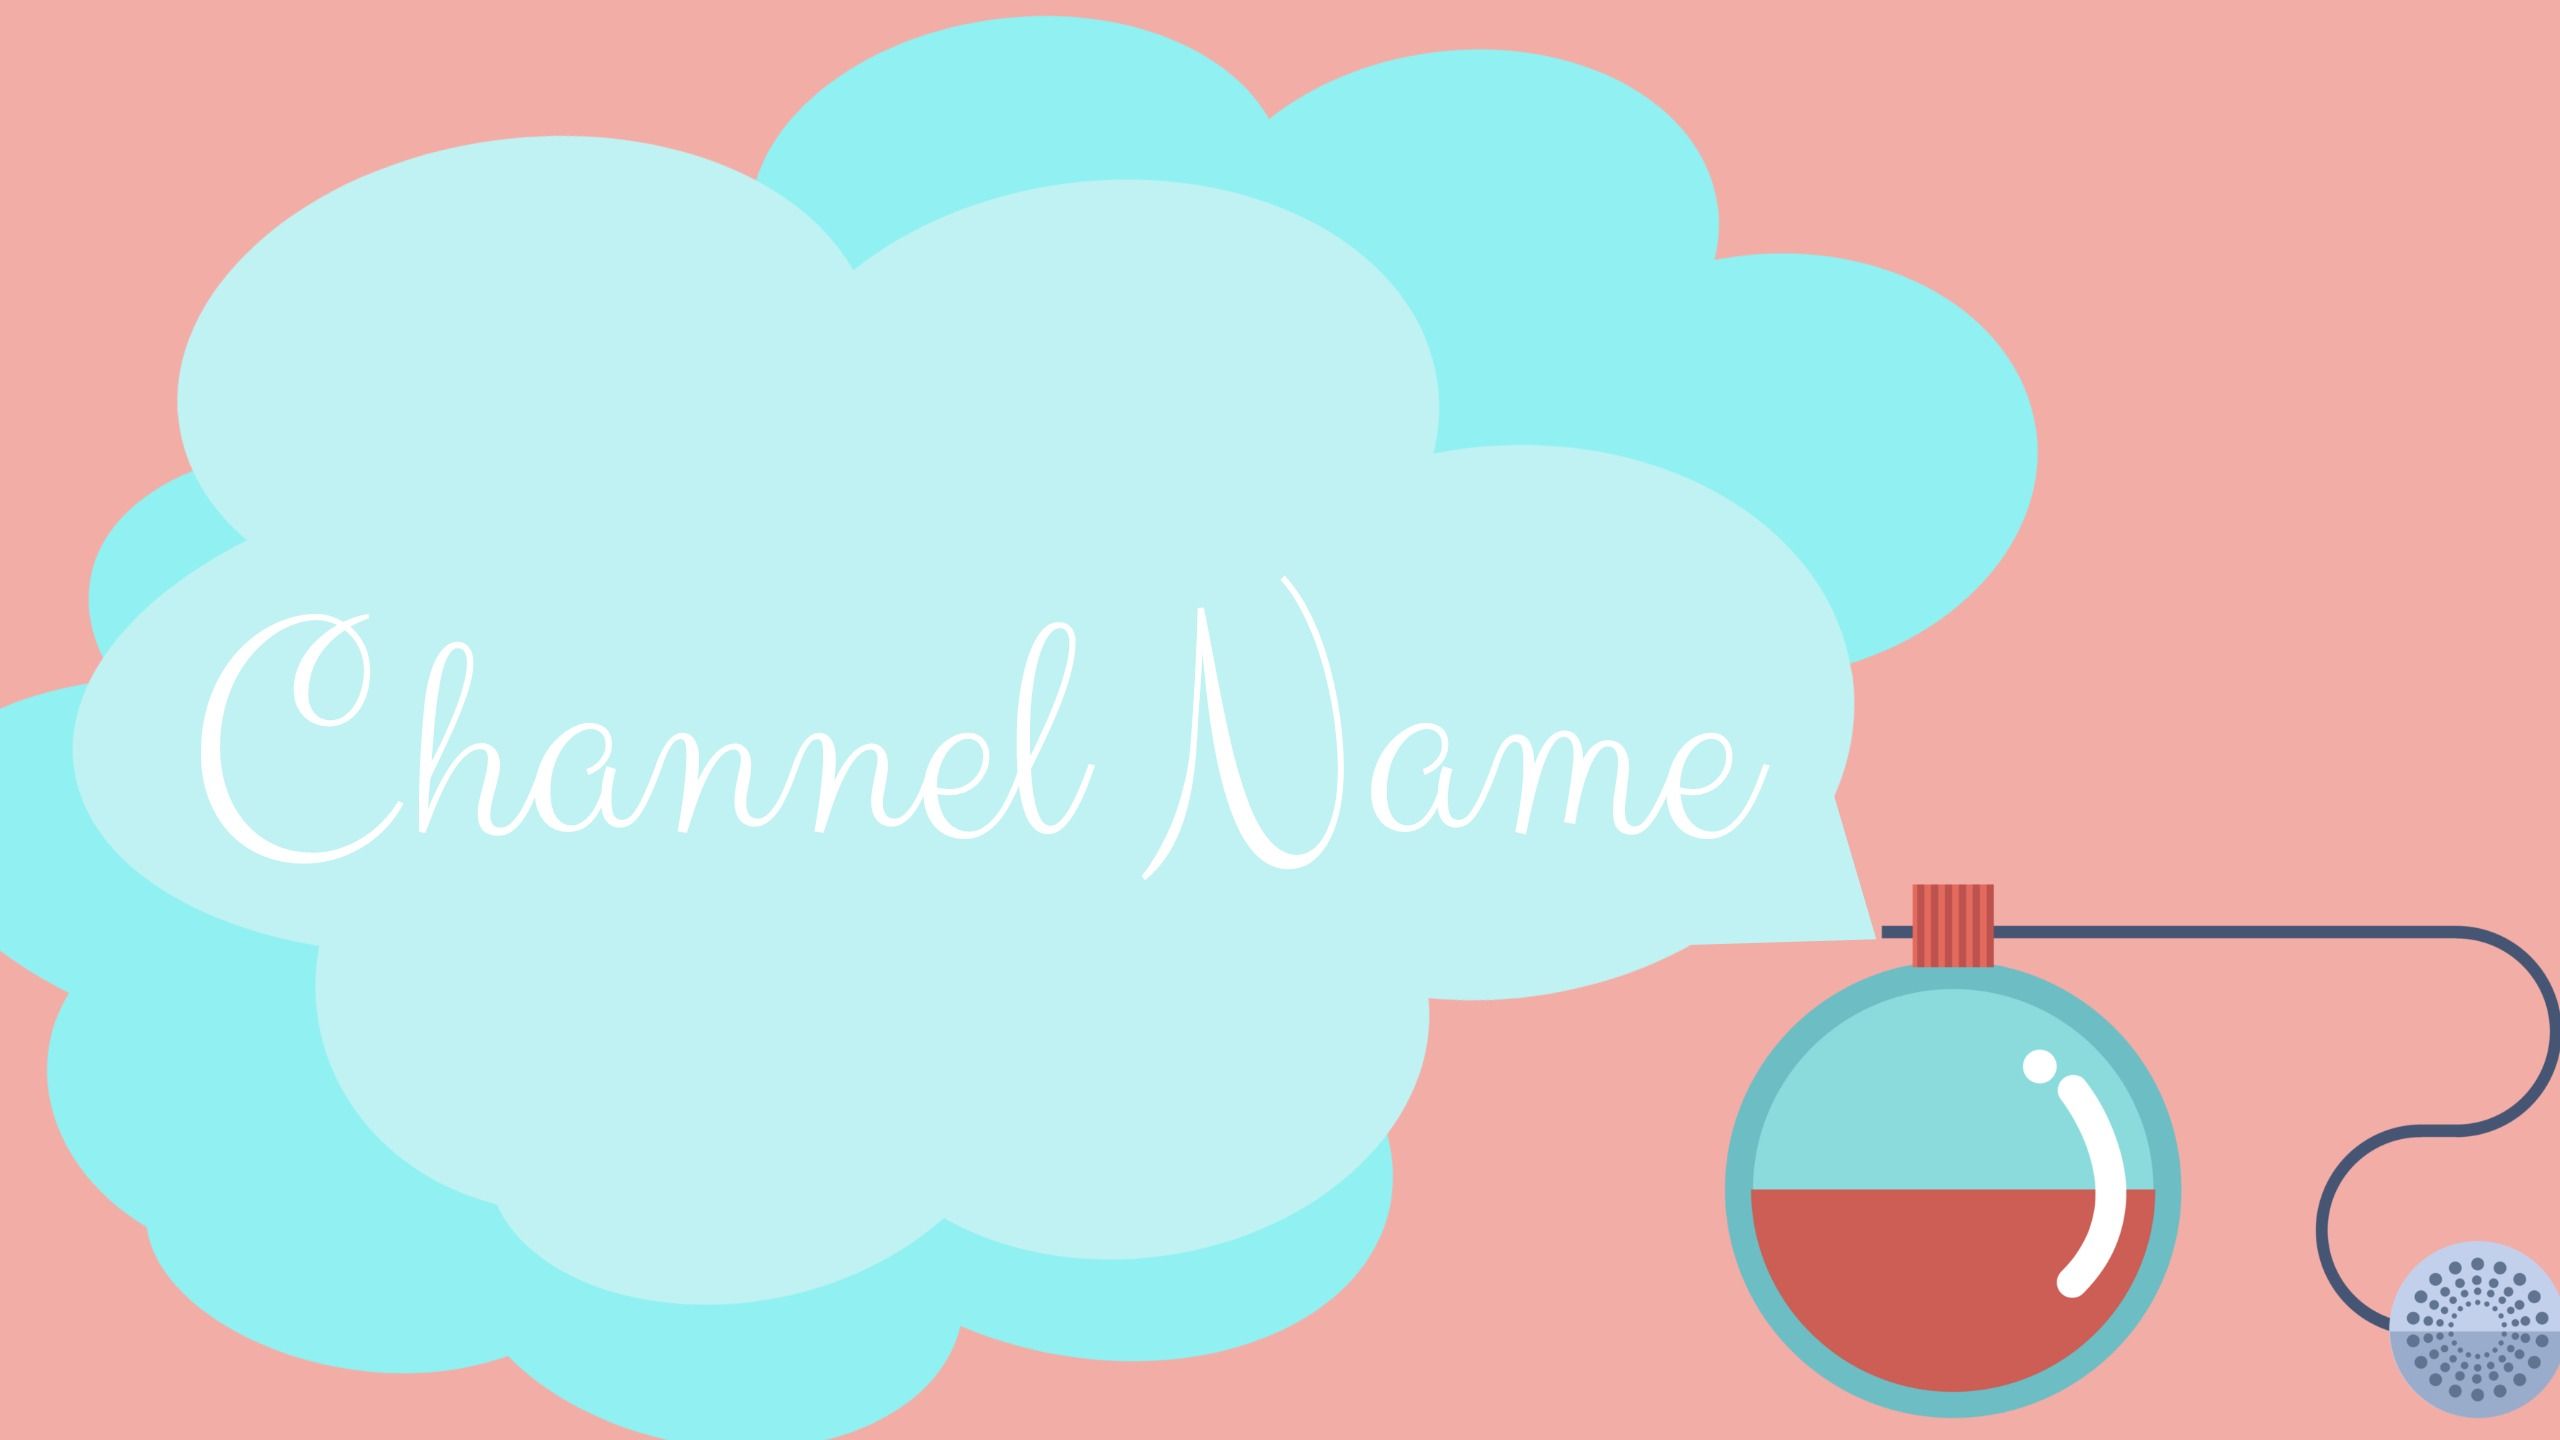 Perfume banner for a YouTube channel about beauty - YouTube channel names: Fresh inspirational ideas - Image